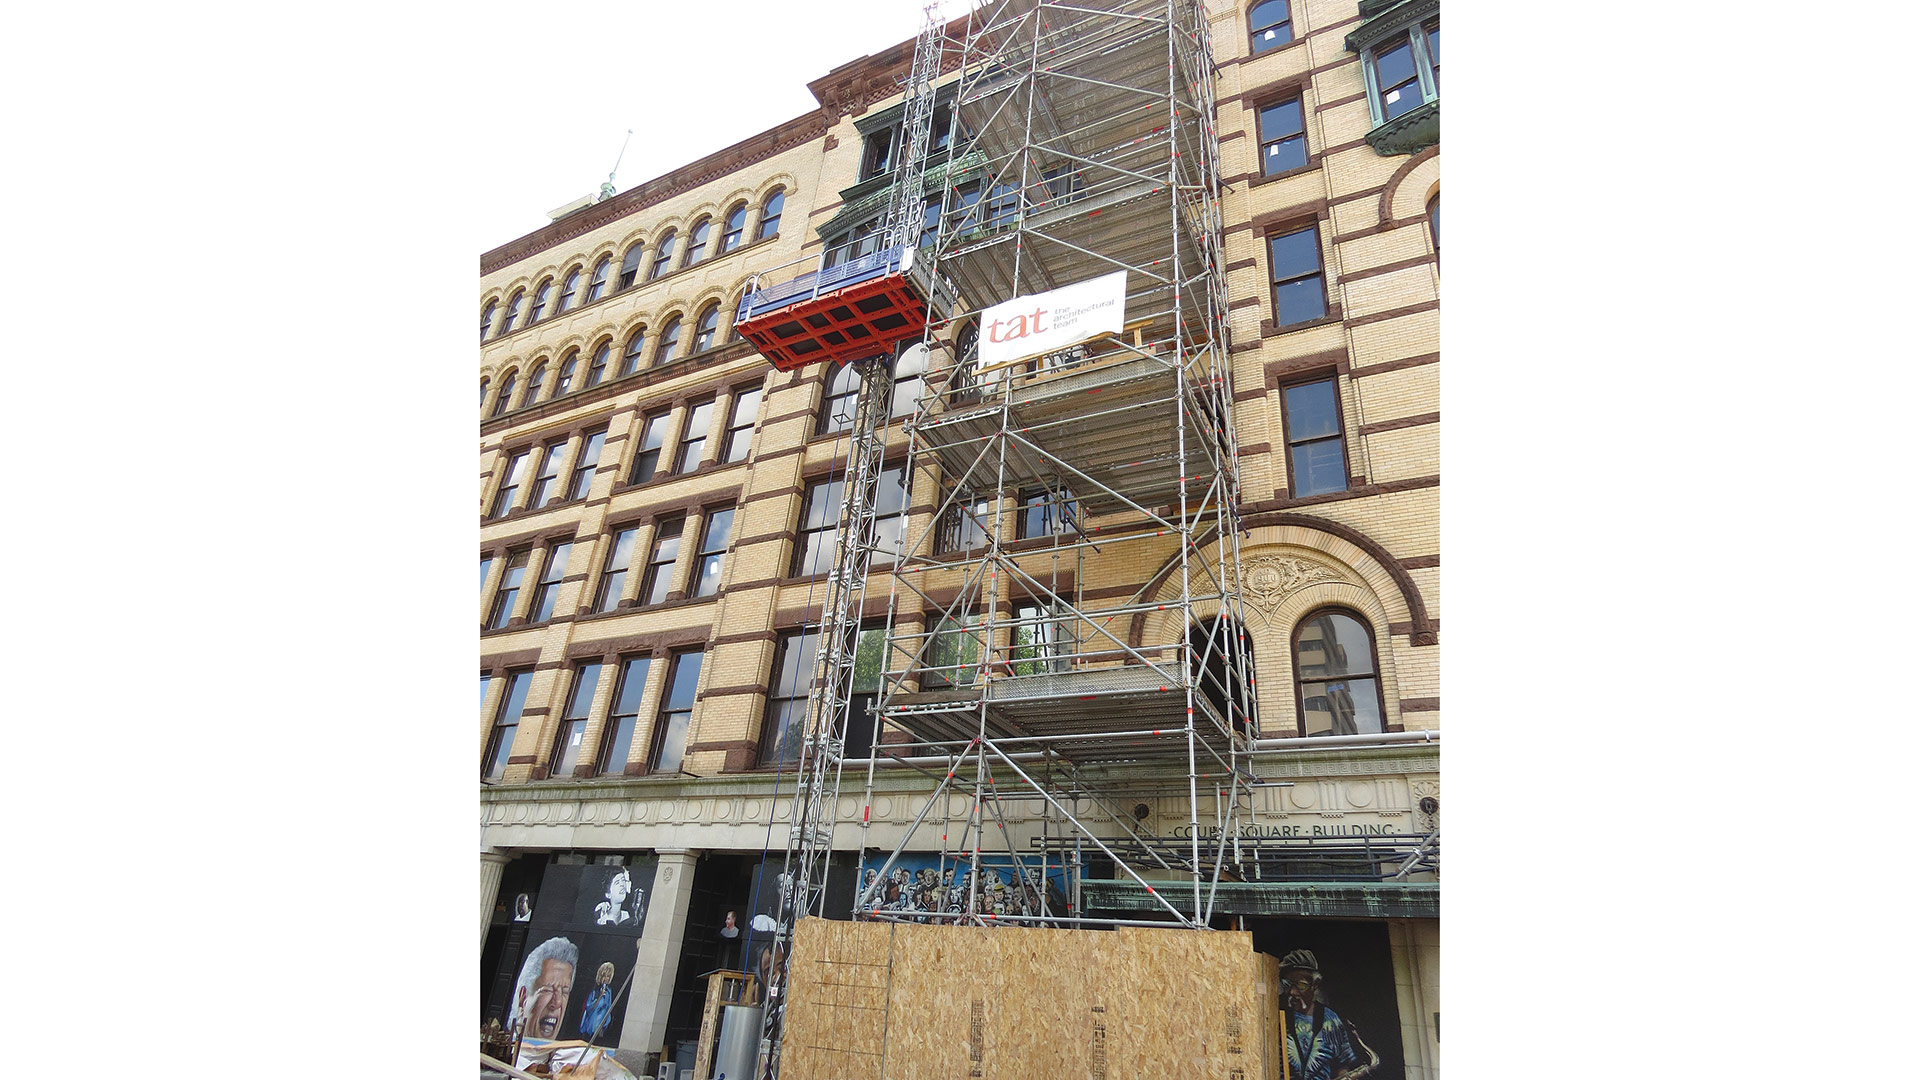 Abatement work at the former Court Square Hotel